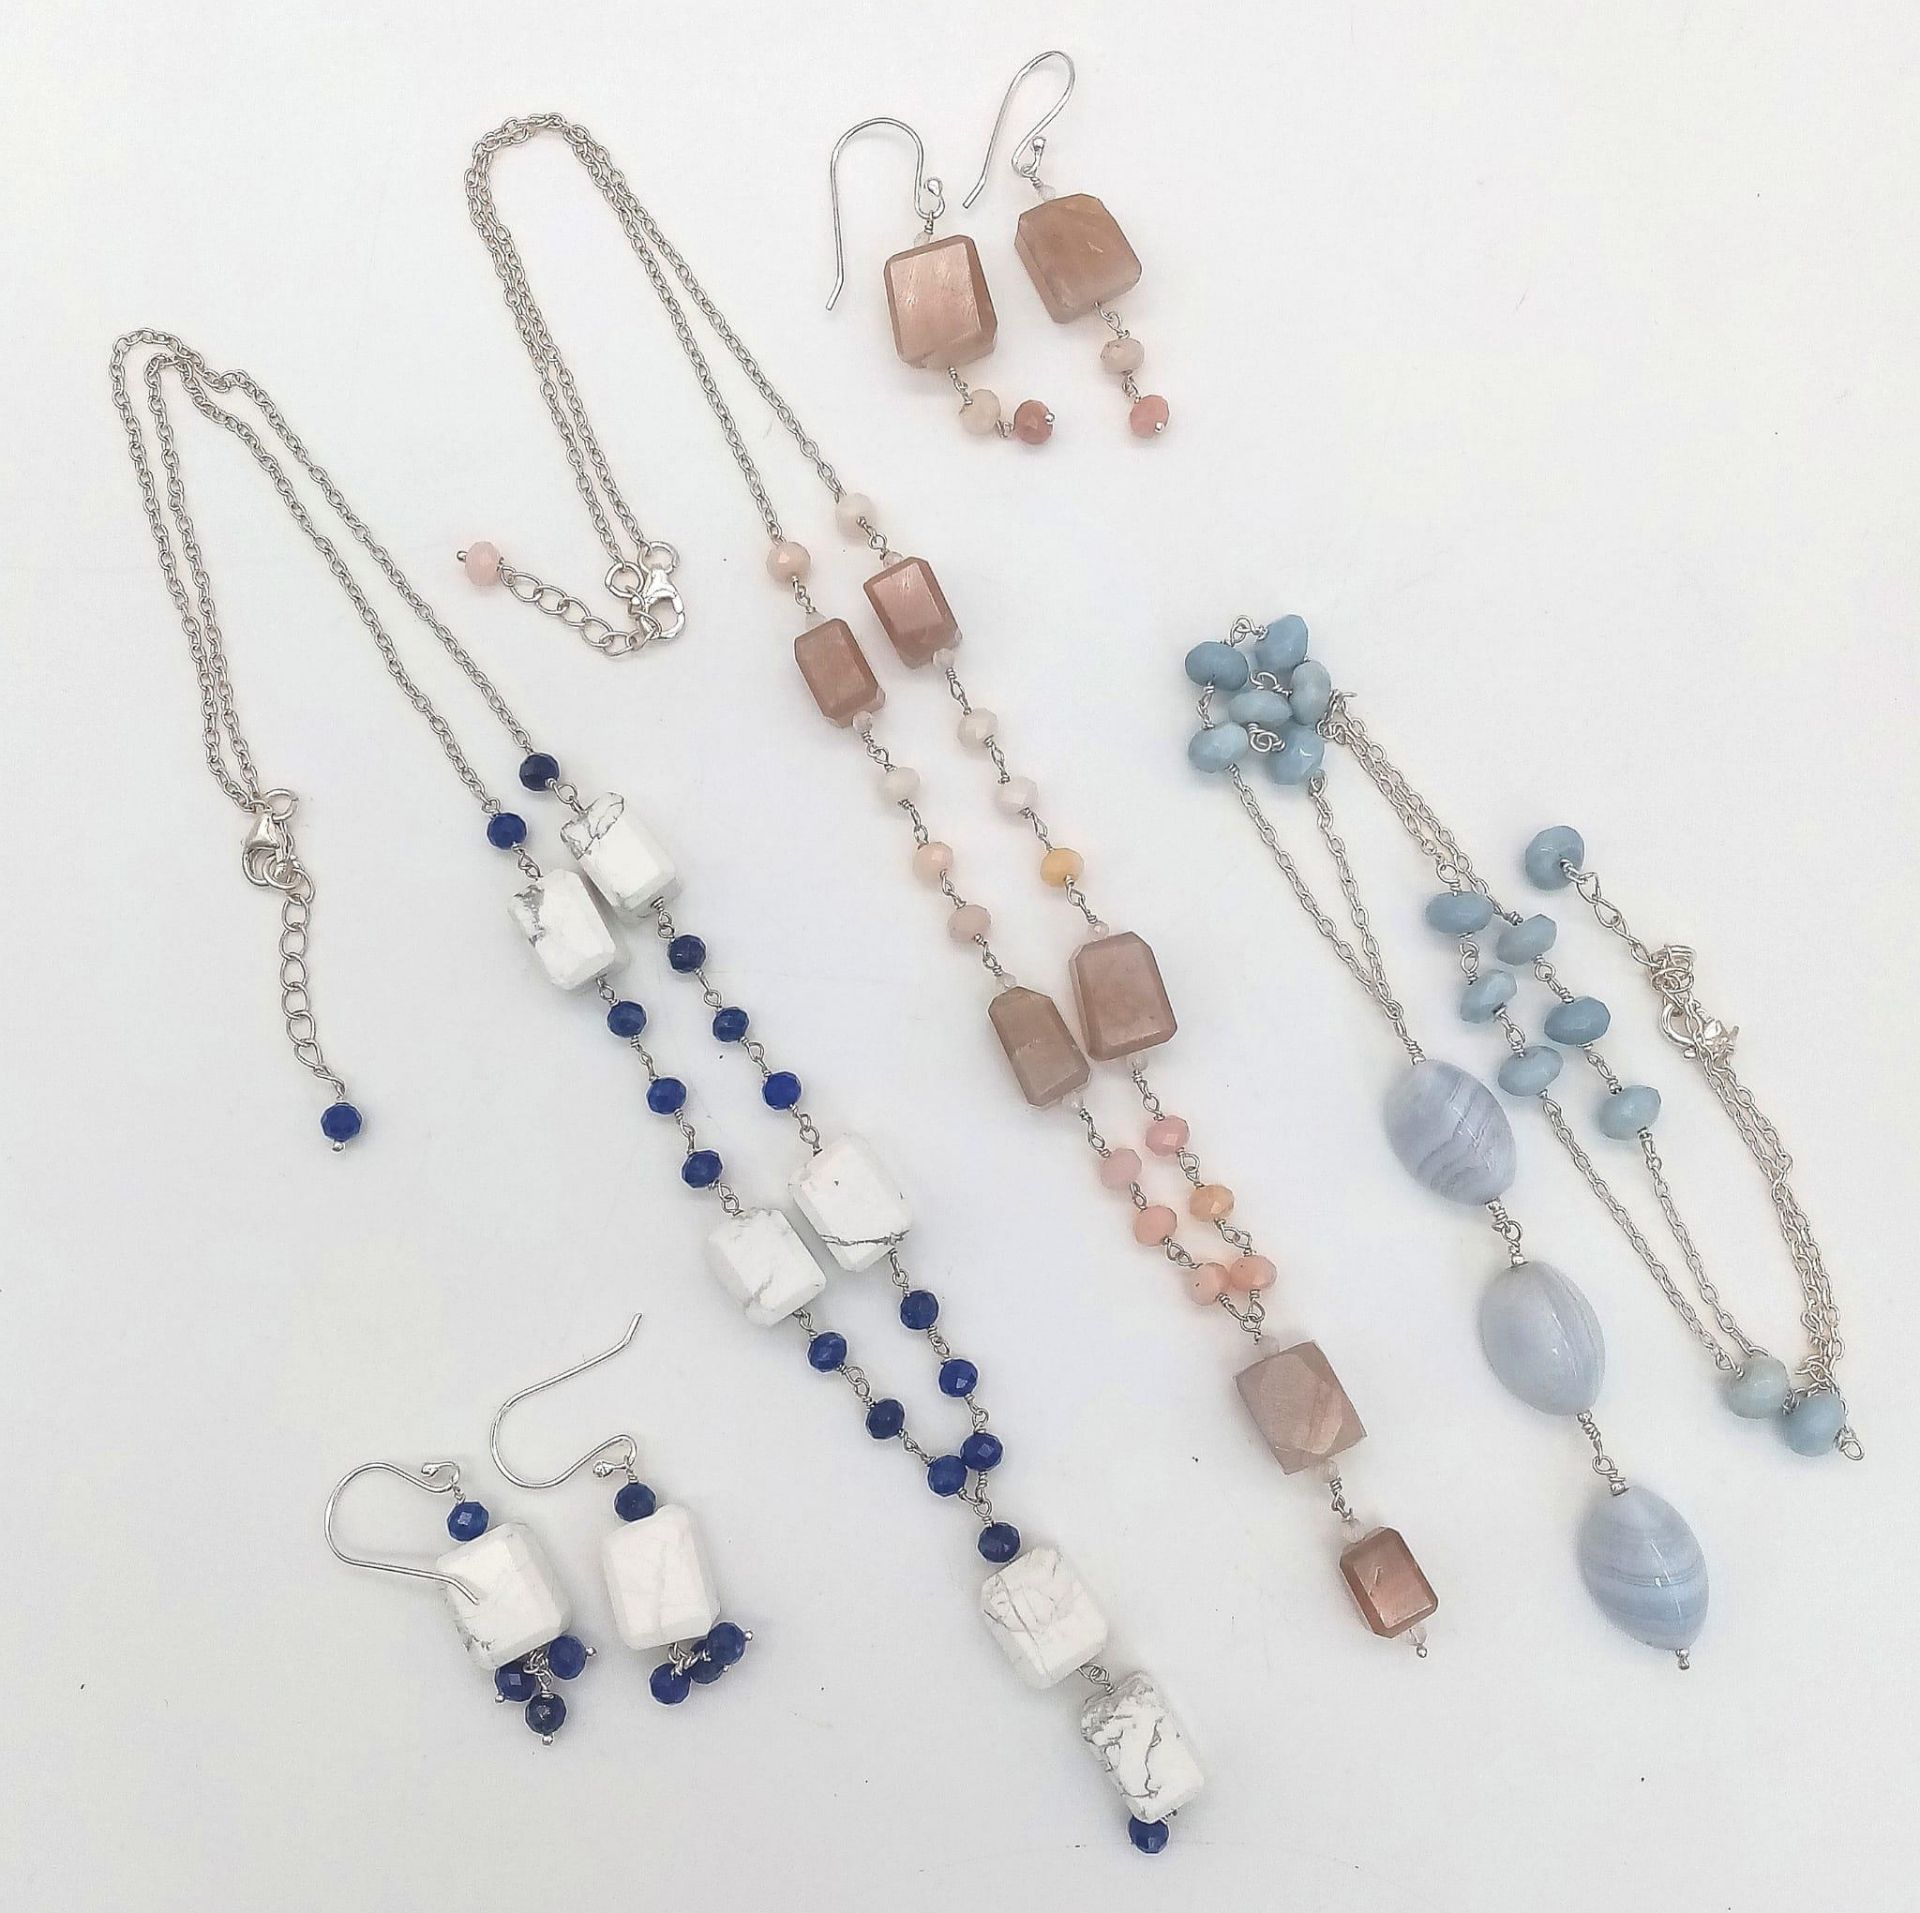 A Collection of 3 Necklaces: Blue Chalcedony, Lapis and Agate and A Pink Agate gemstone Necklace -